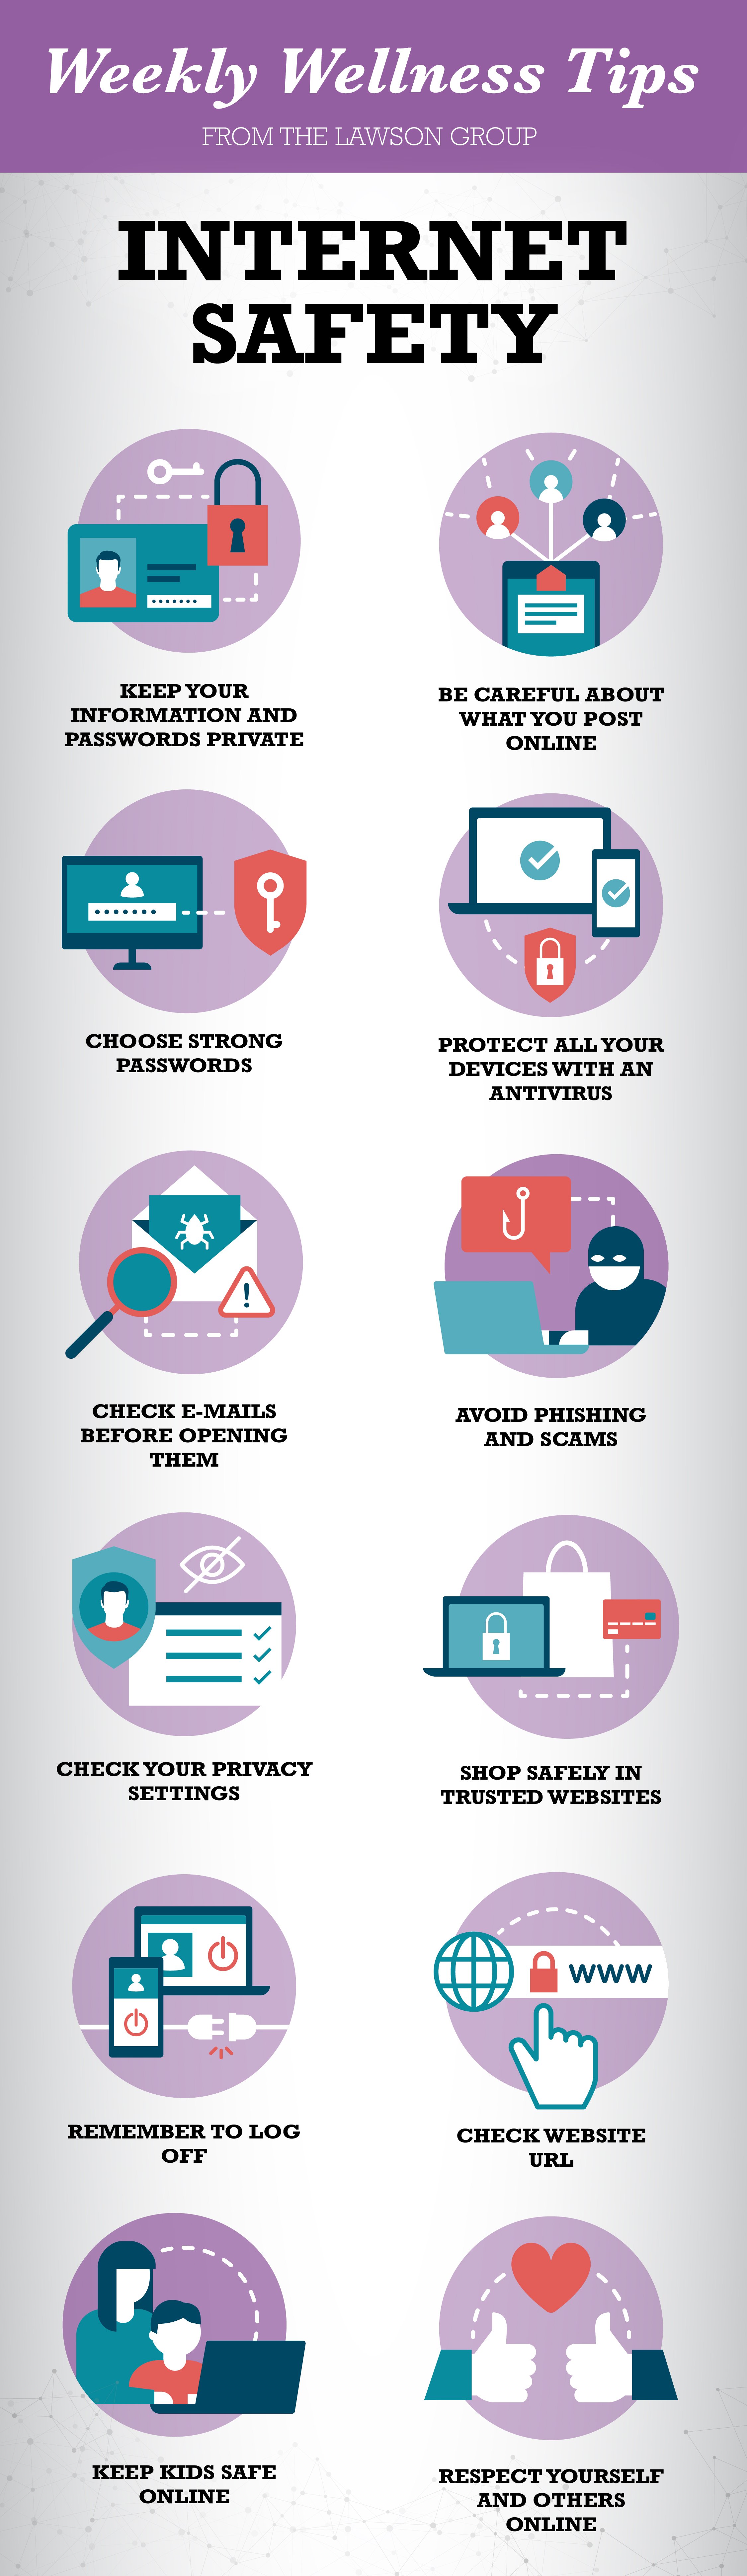 TLG22005 Wellness Tips Internet Safety Infographic-1080px-01